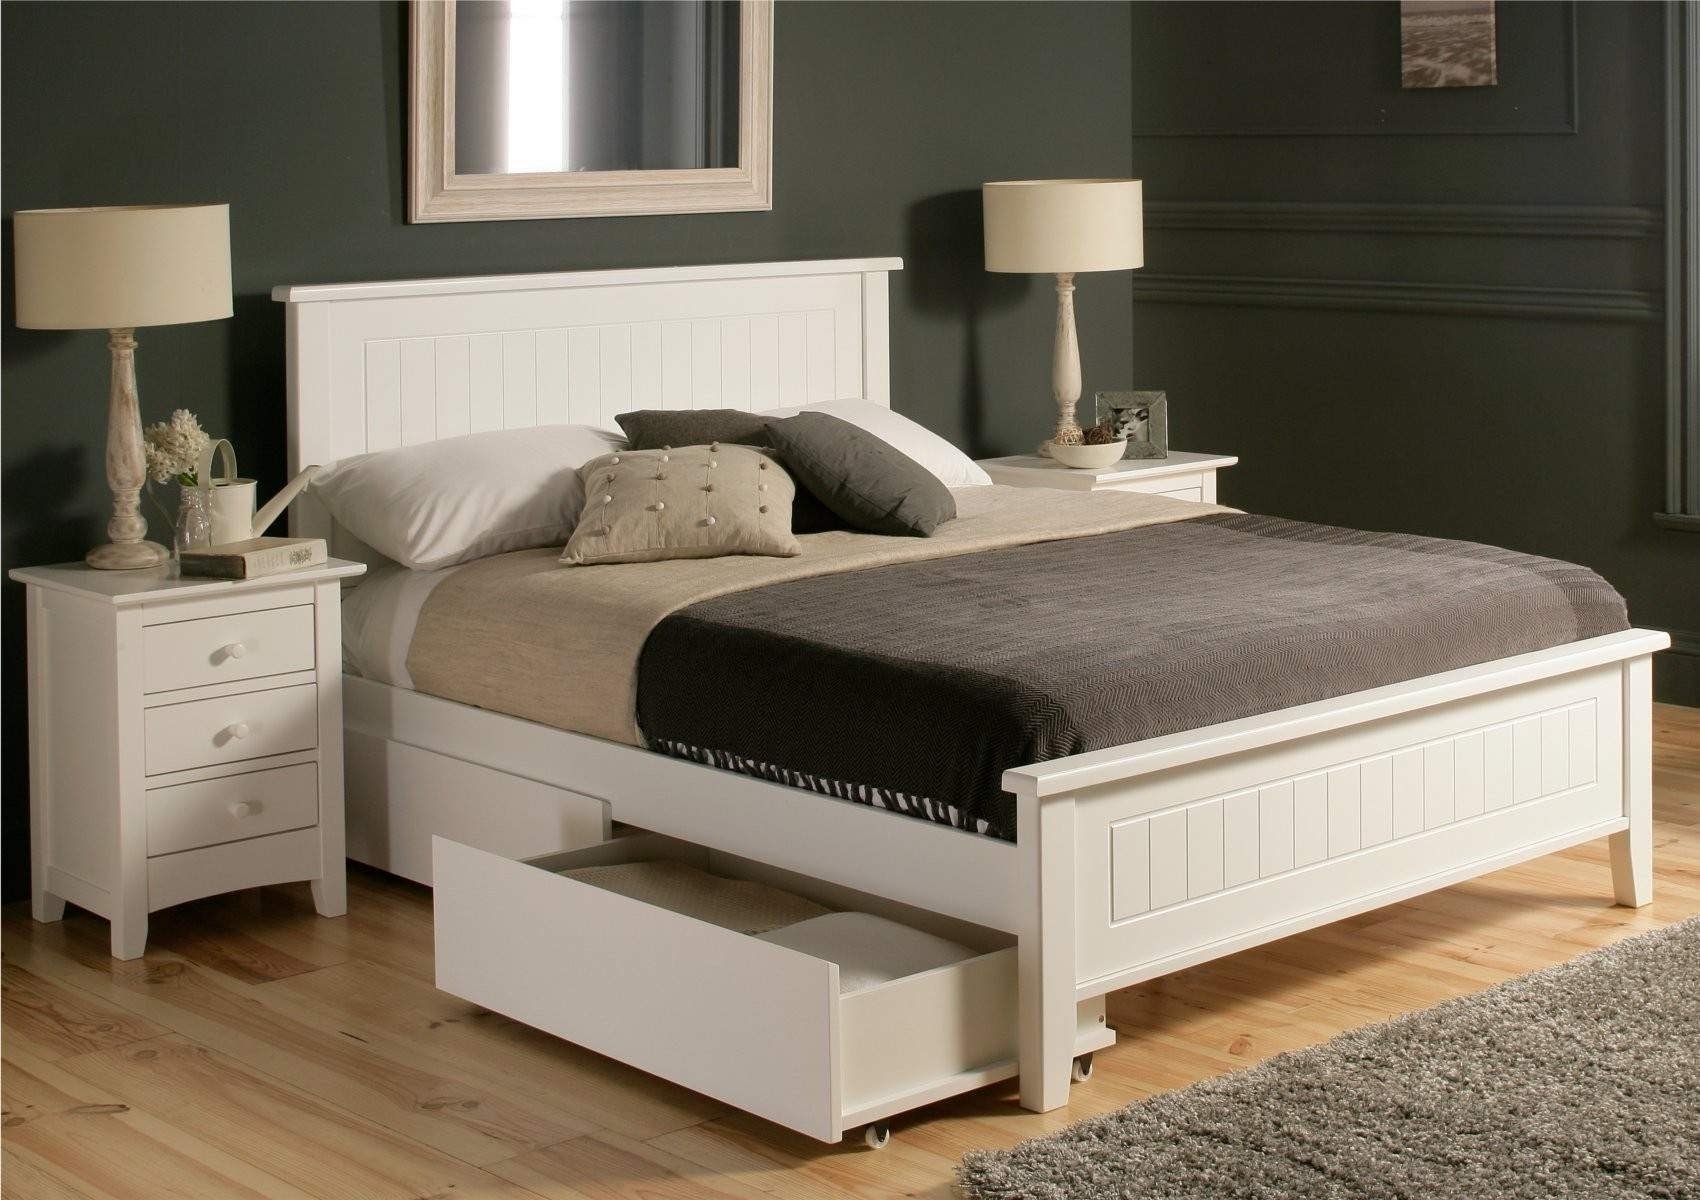 Bed With Drawers Underneath Visualhunt, King Bed Frames With Storage Underneath